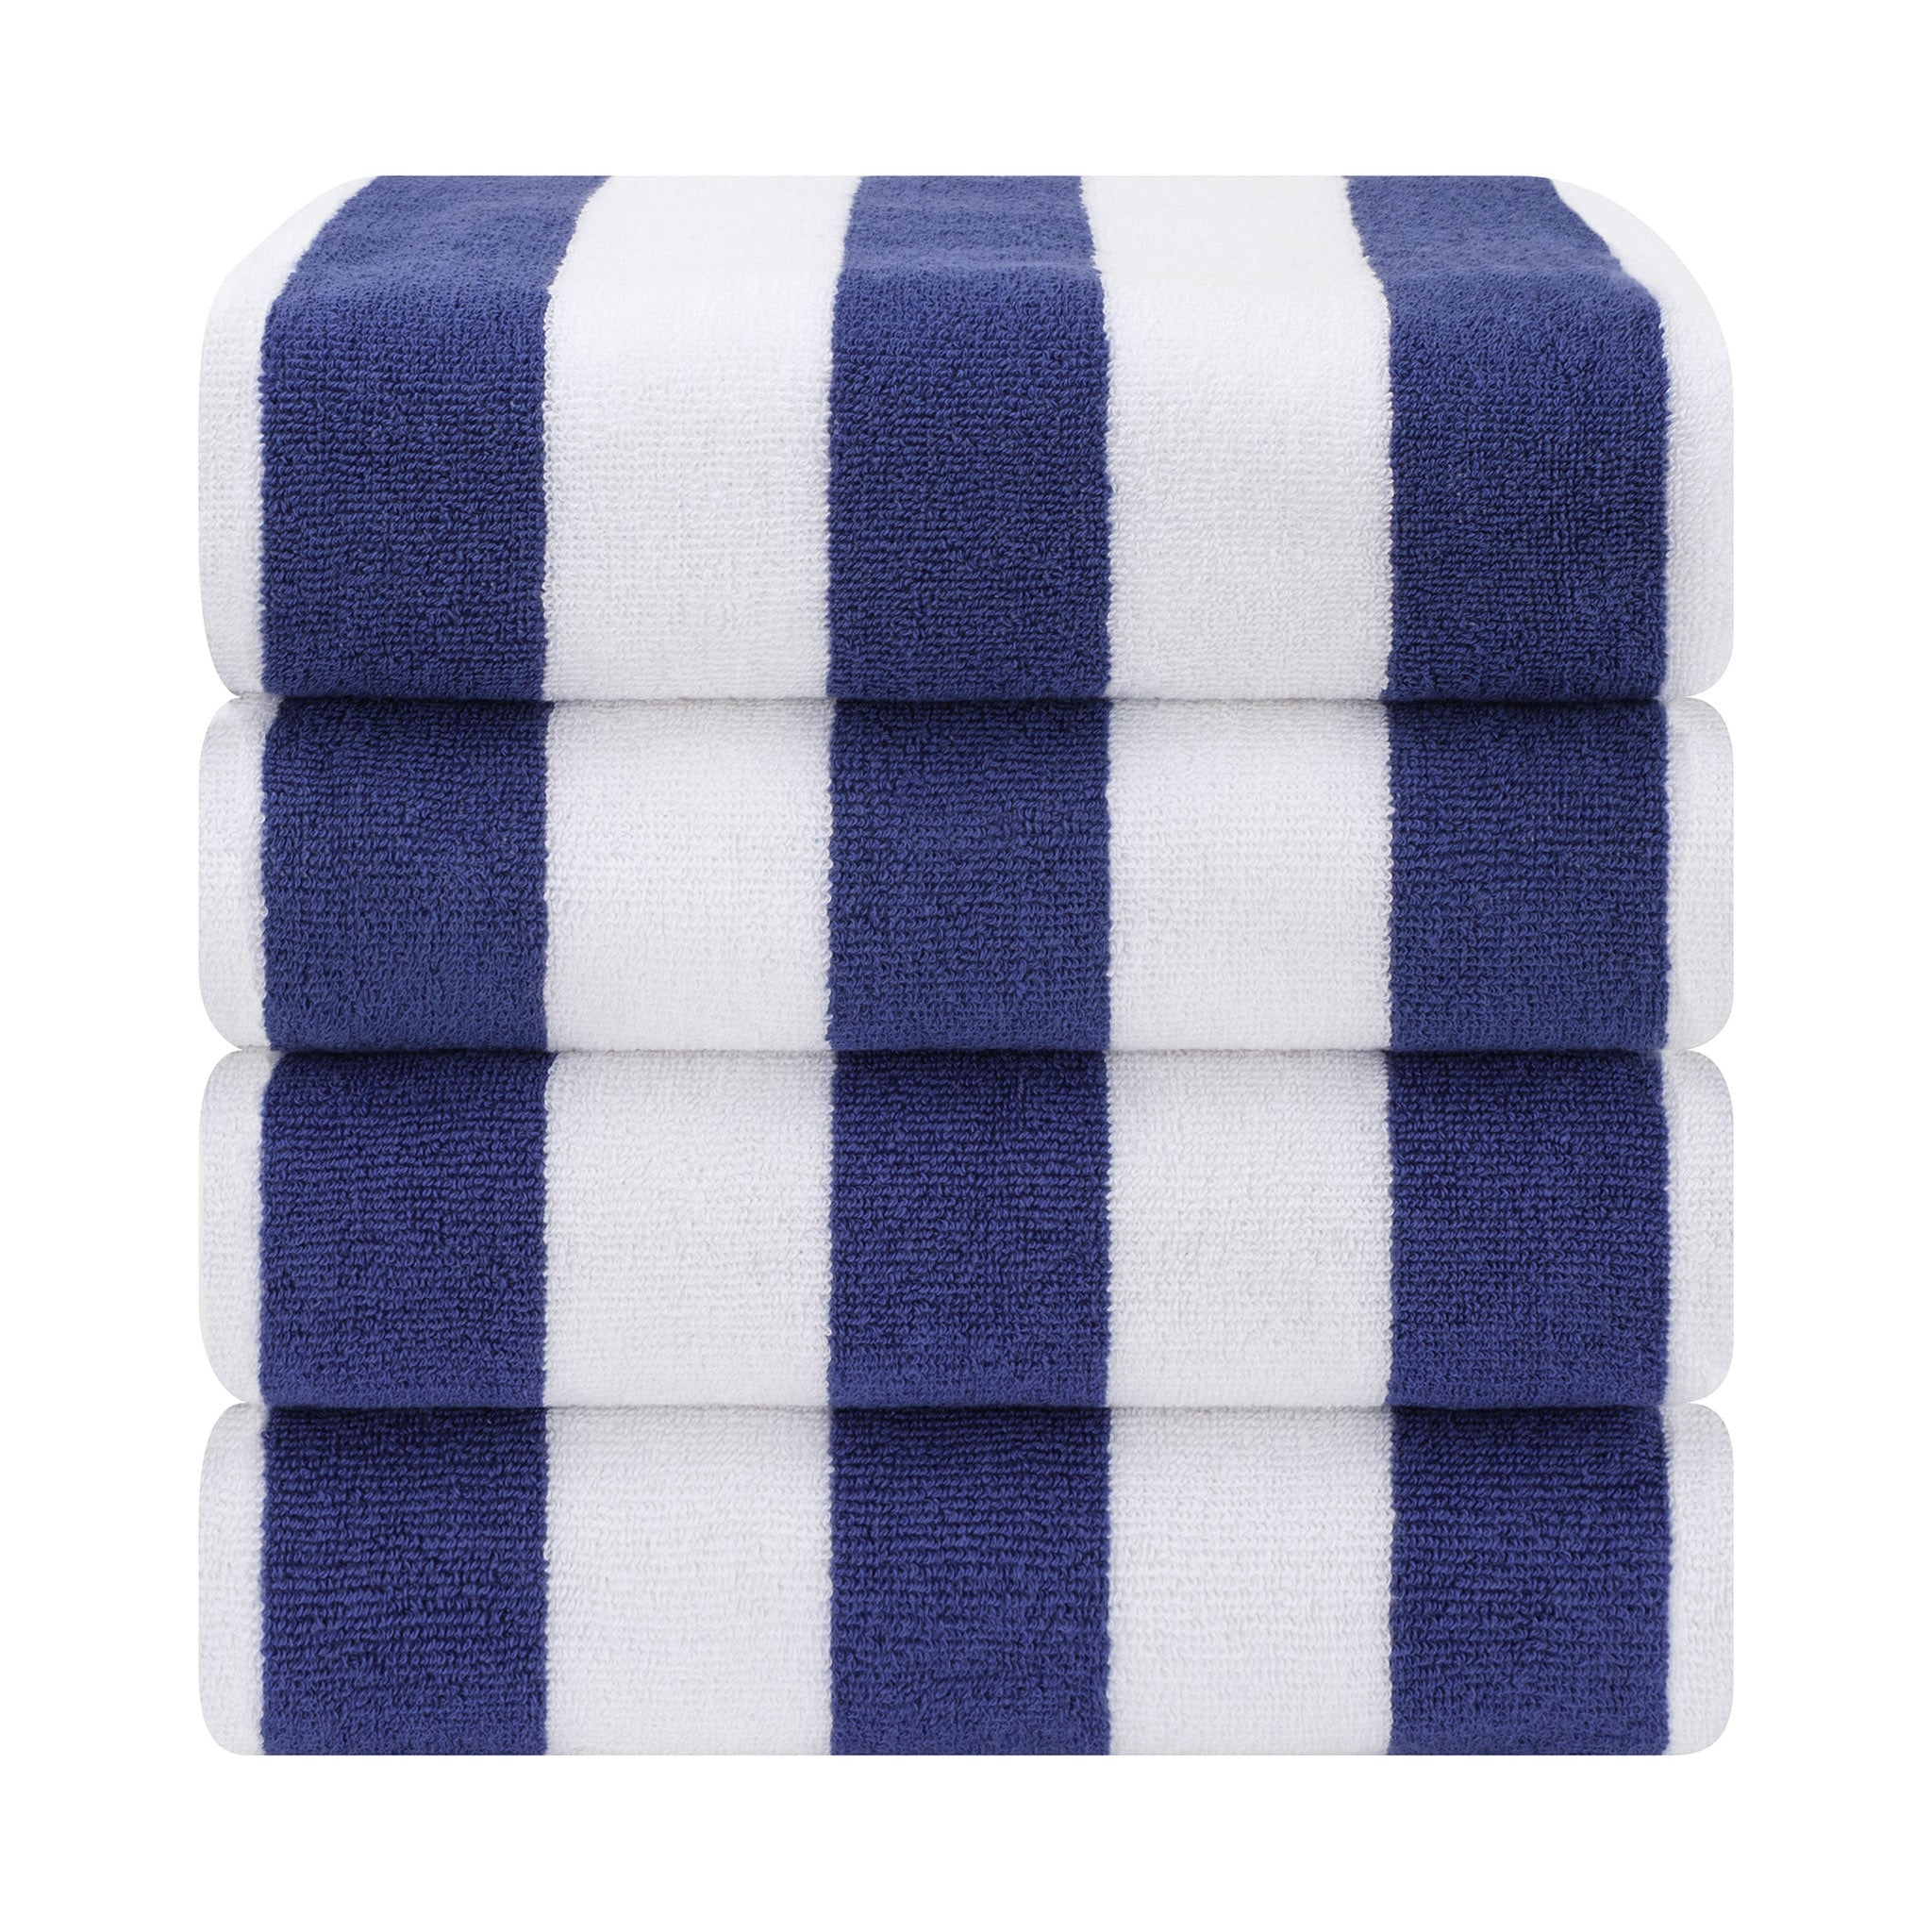 American Soft Linen 100% Cotton 4 Pack Beach Towels Cabana Striped Pool Towels -navy-blue-2